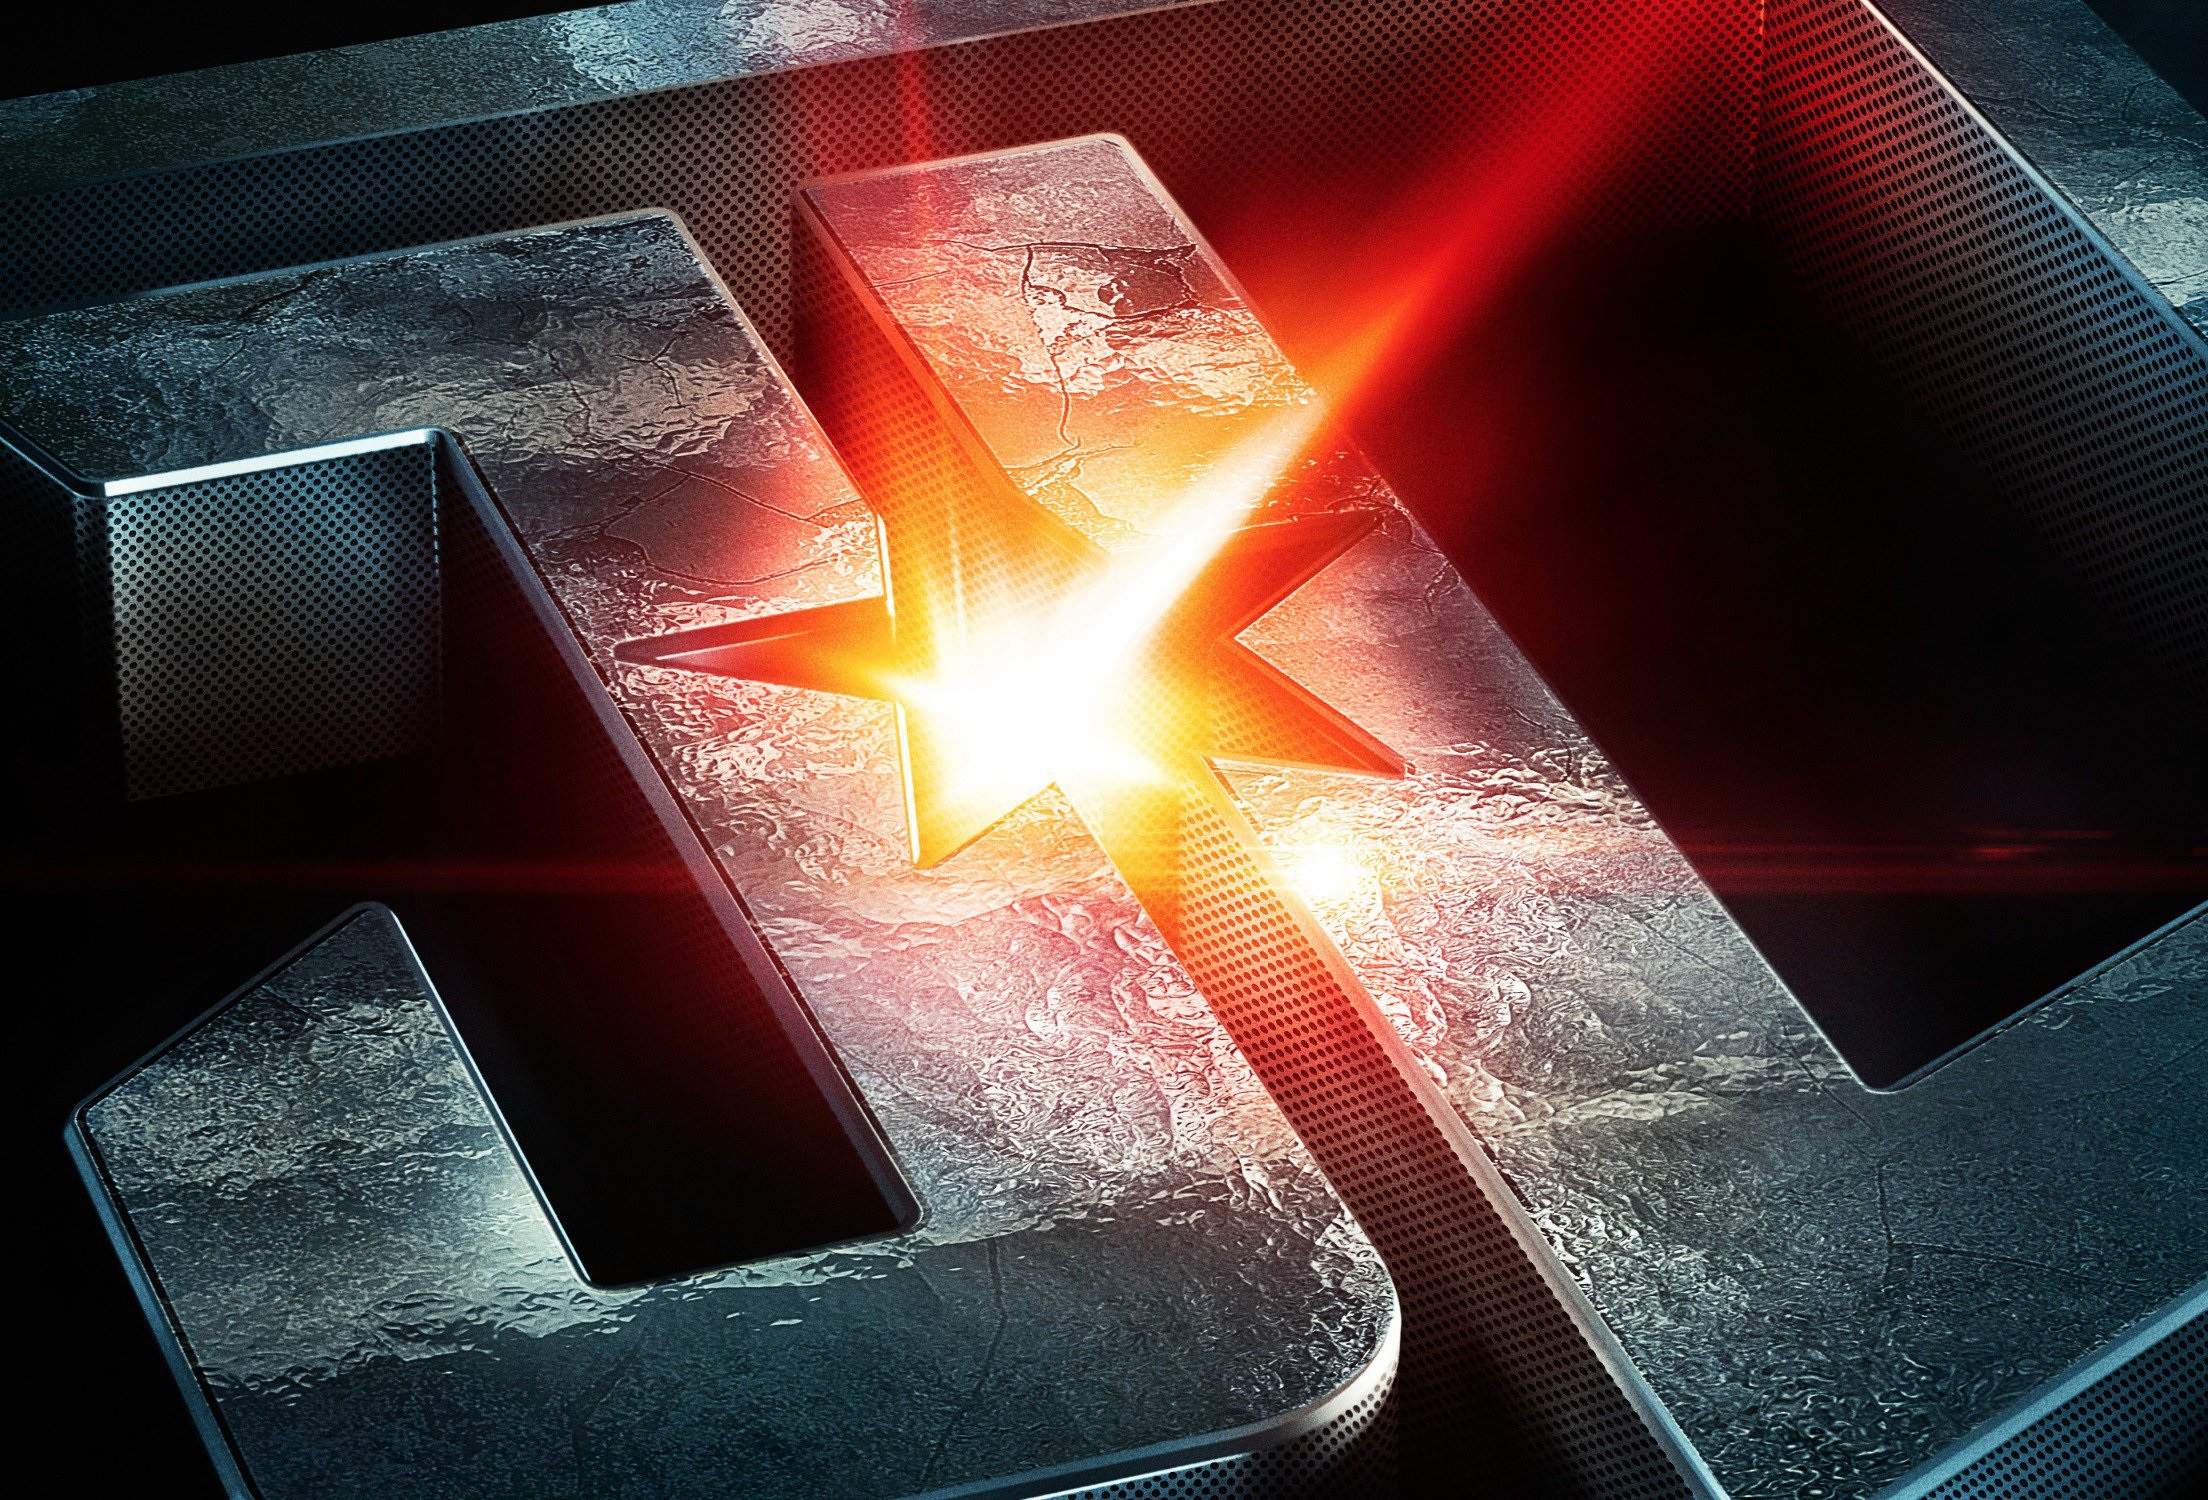 movie, justice league lock screen backgrounds